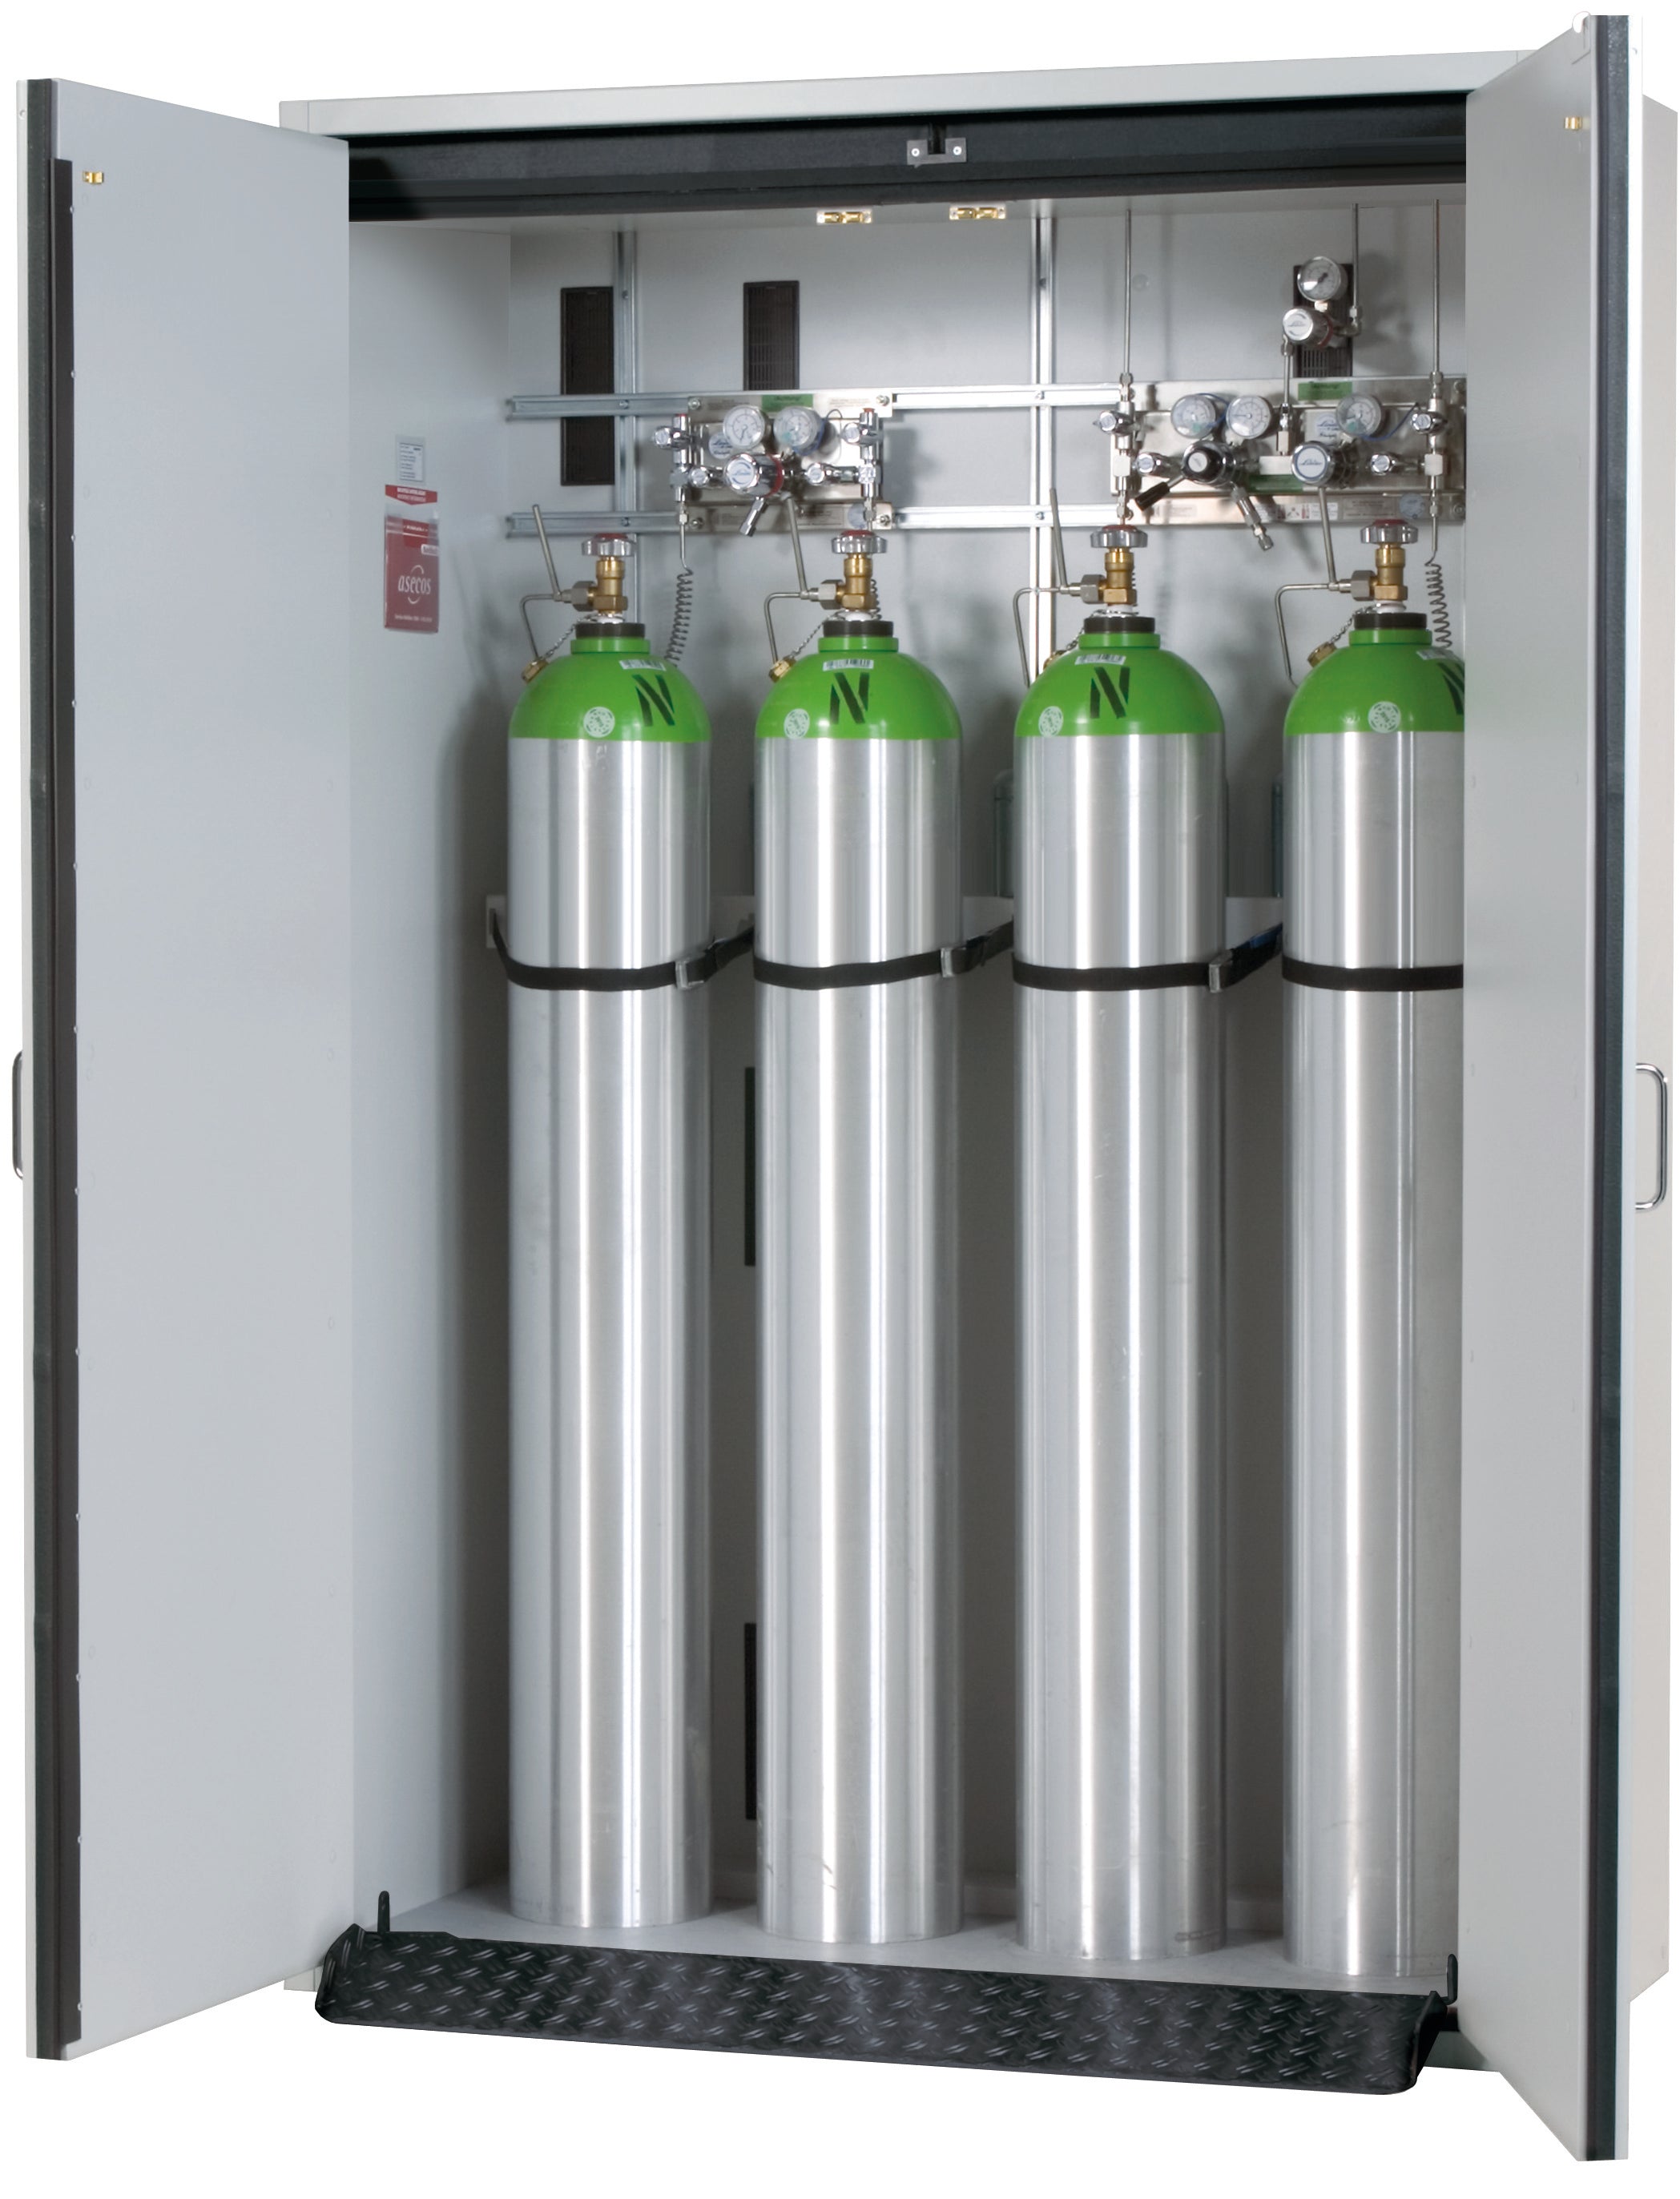 Type 30 compressed gas bottle cabinet G-CLASSIC-30 model G30.205.140 in light gray RAL 7035 with standard interior fittings for 4x compressed gas bottles of 50 liters each